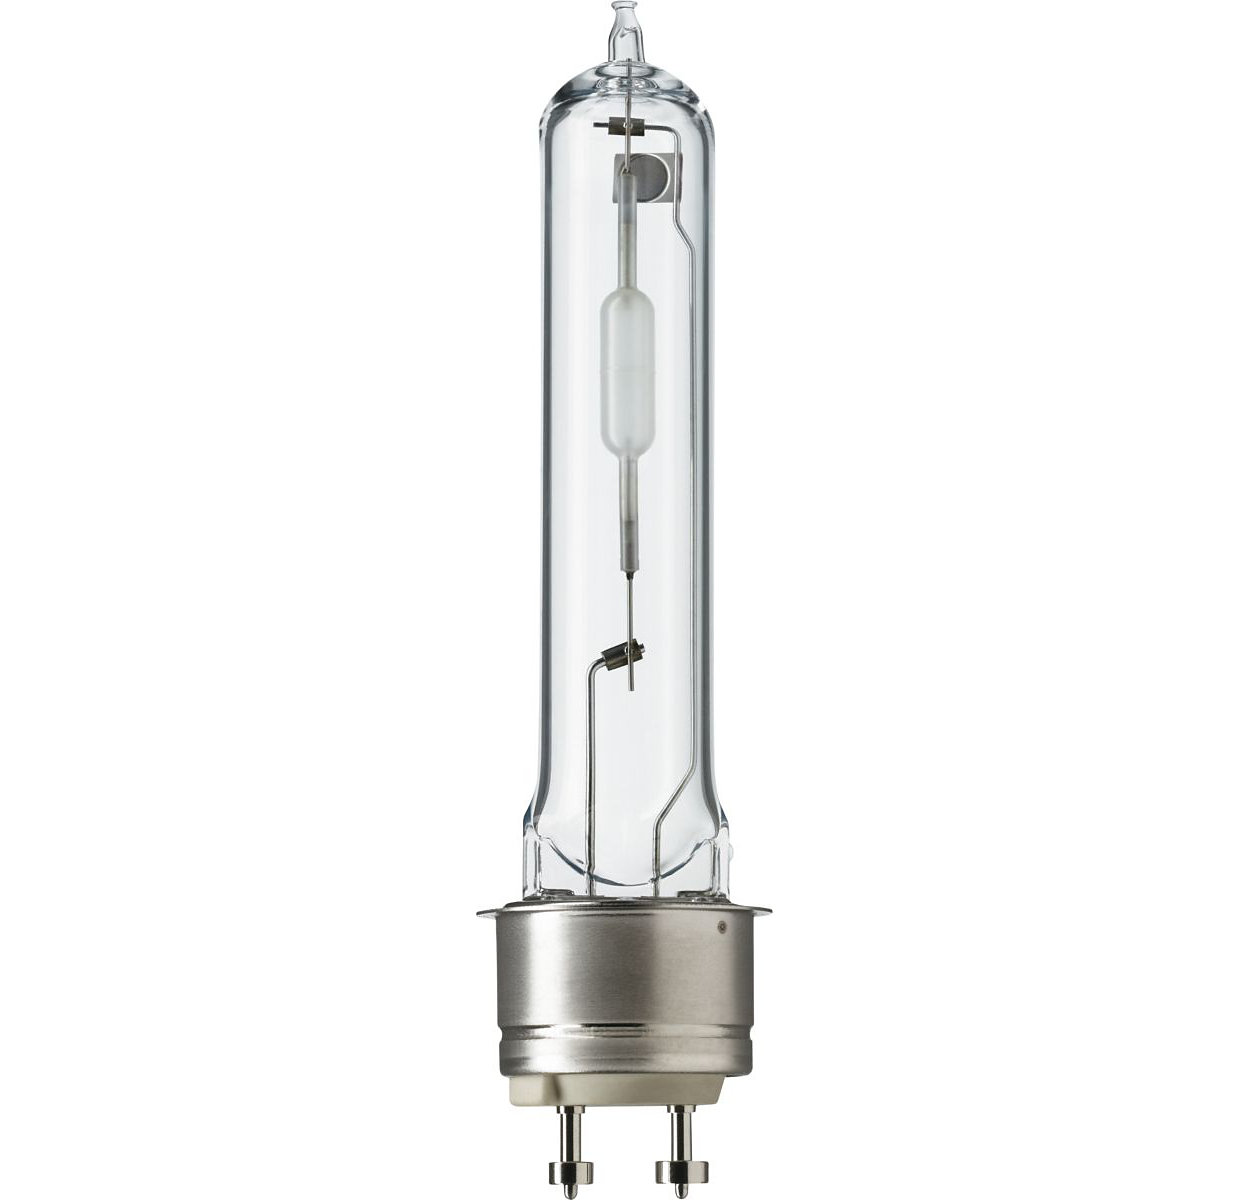 The most energy-efficient reliable white light solution for Outdoor